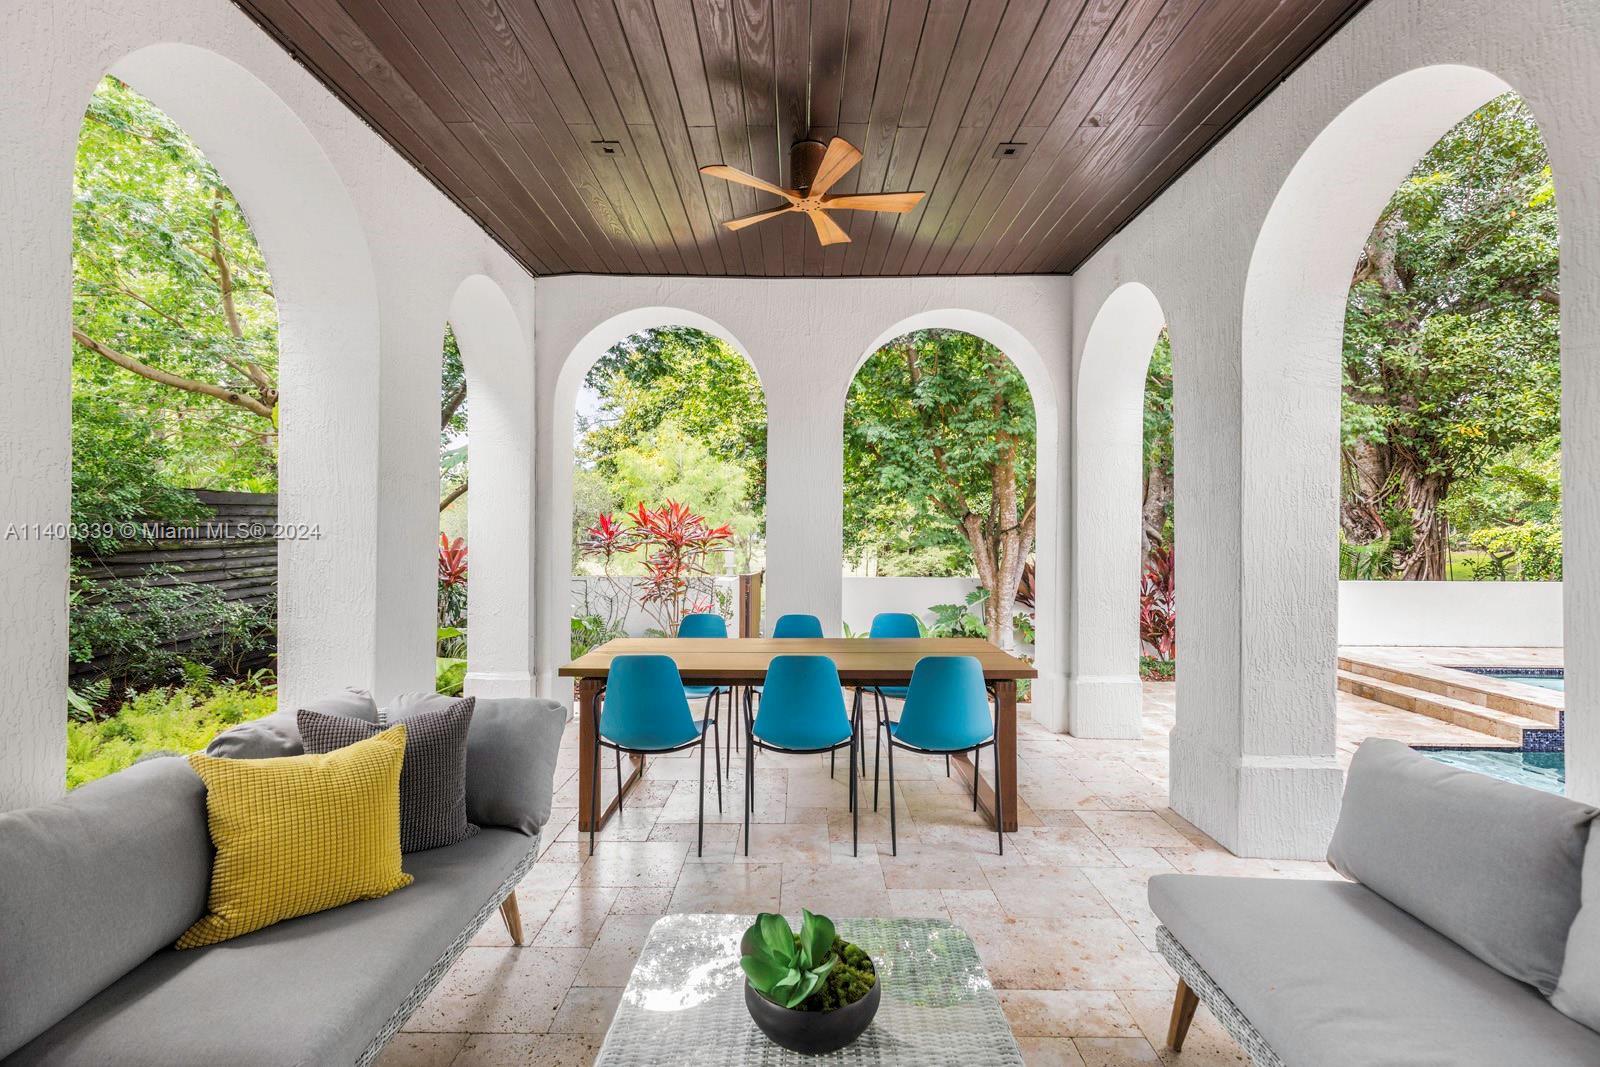 Stunning home on a quiet street in lush South Coconut Grove. Light-filled interiors with a modern vi